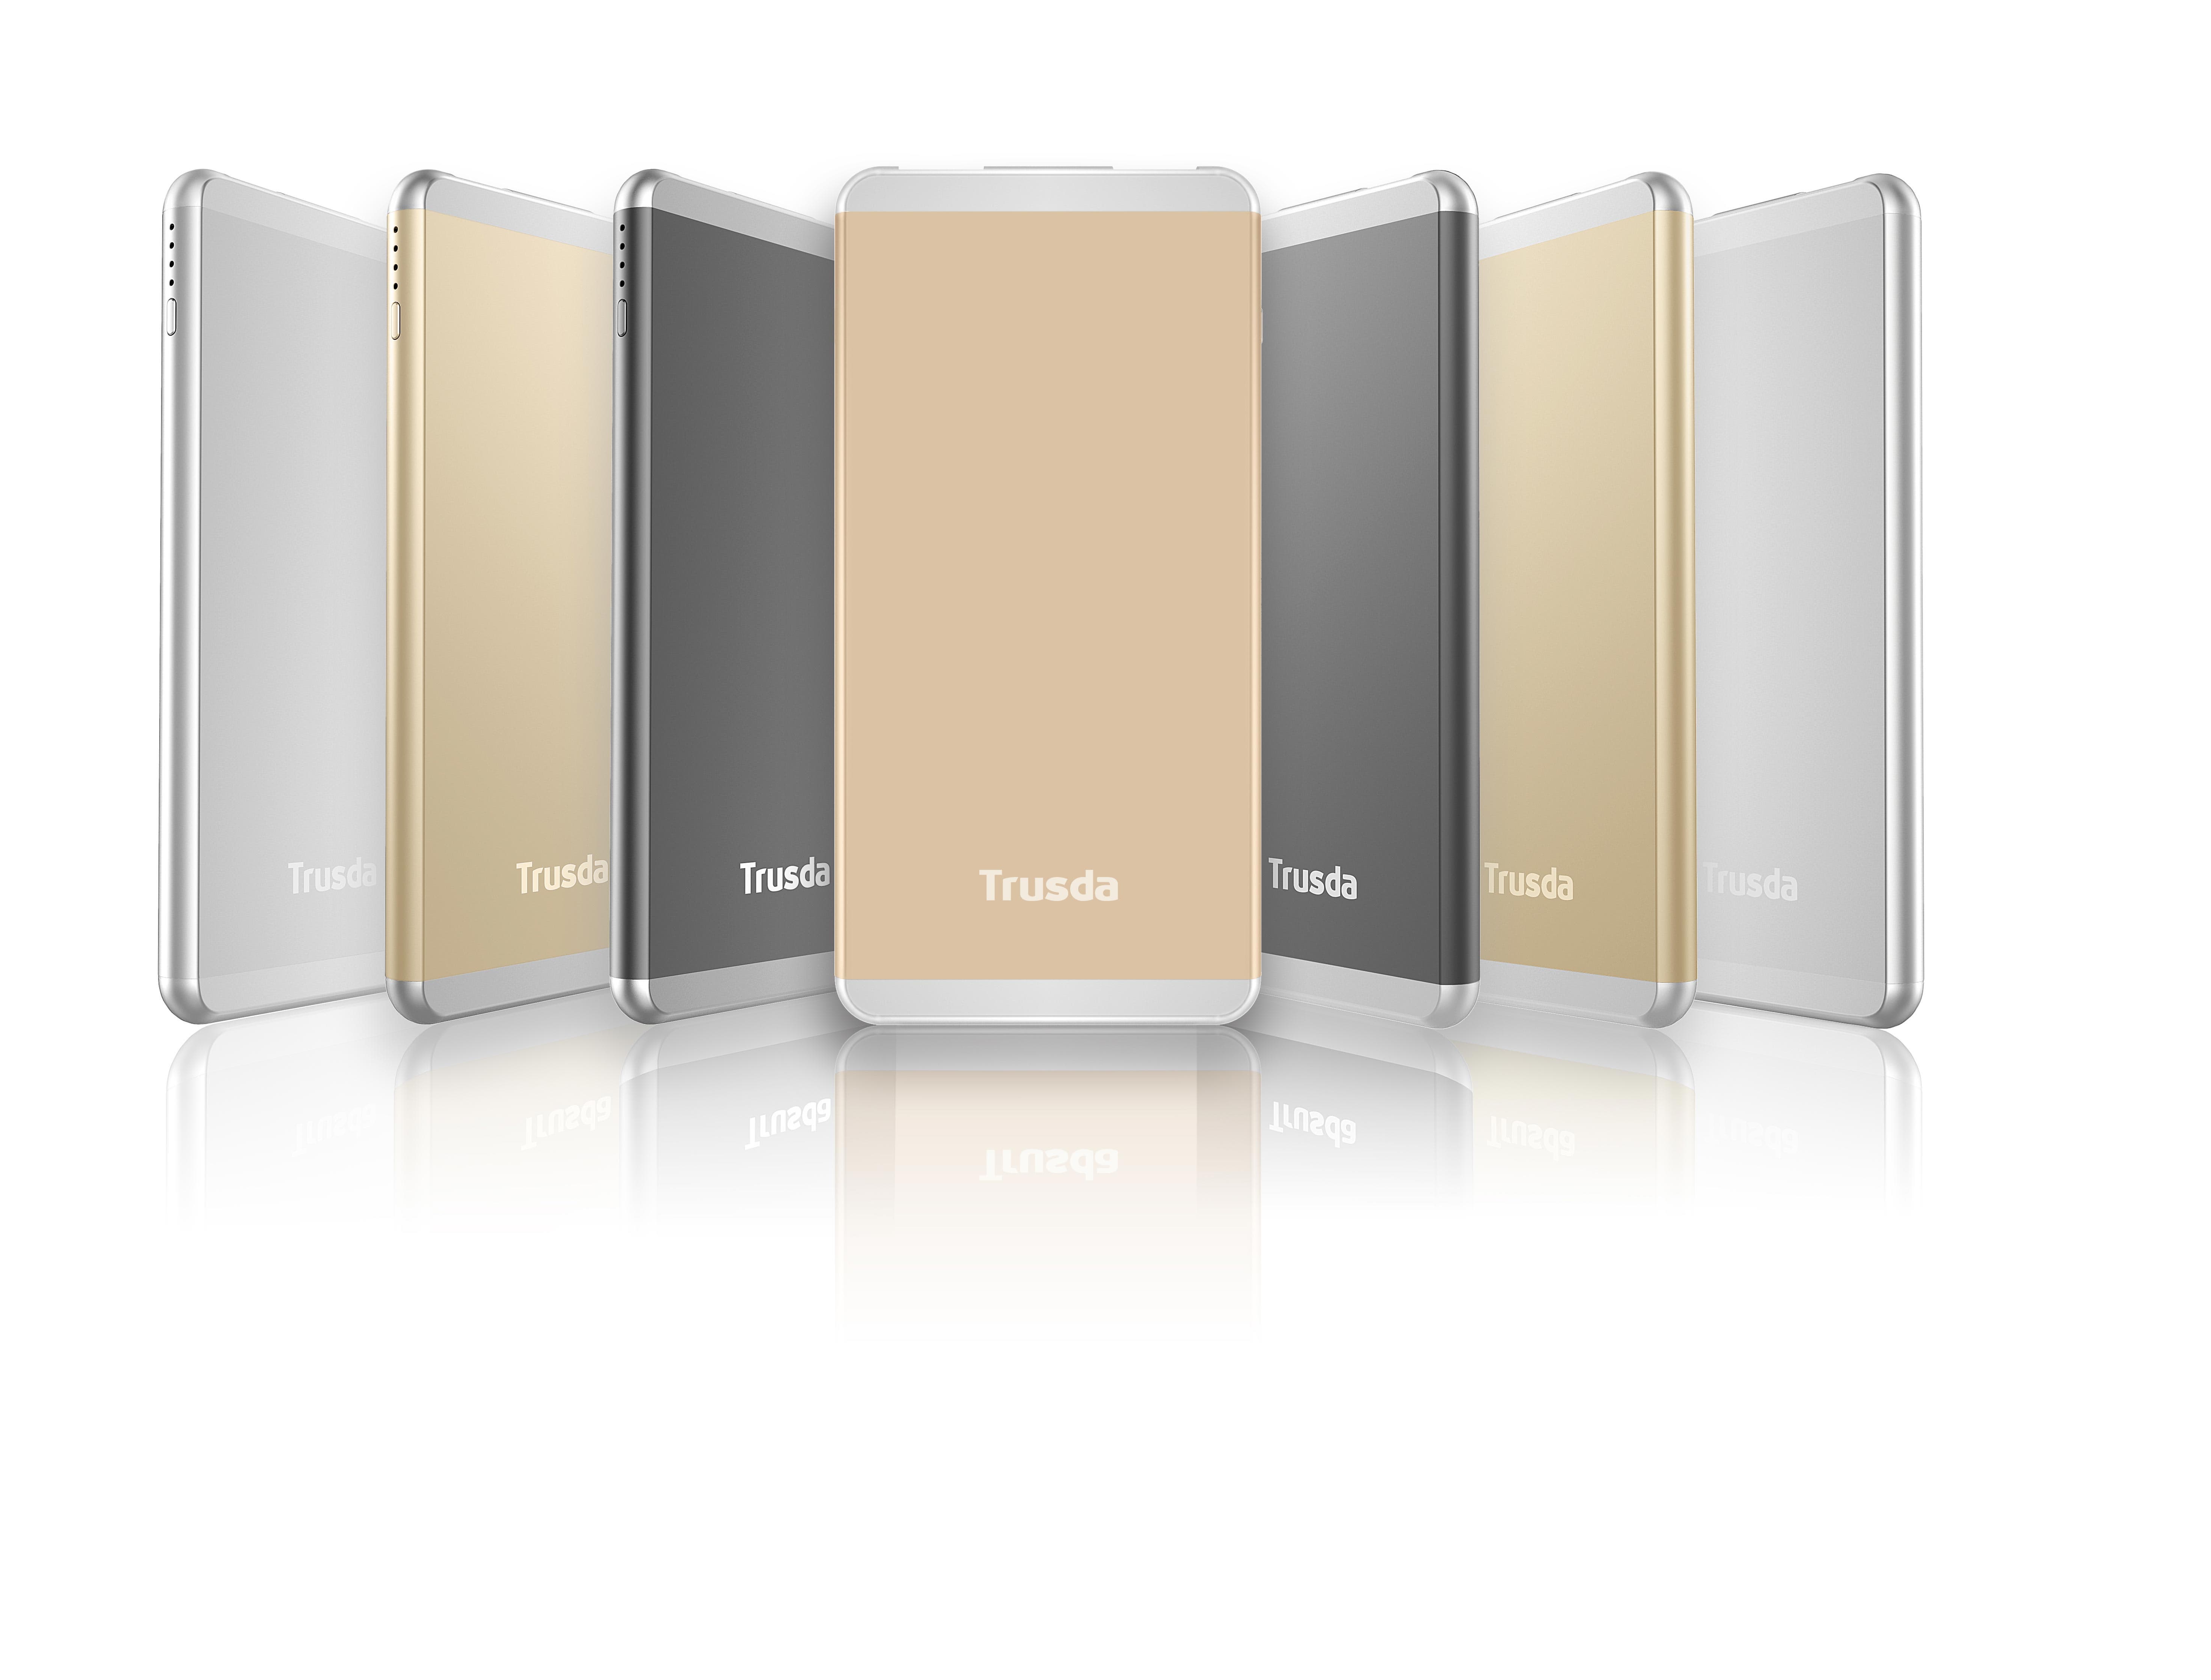 Newest Ultra thin iphone 6 shape compact design power bank